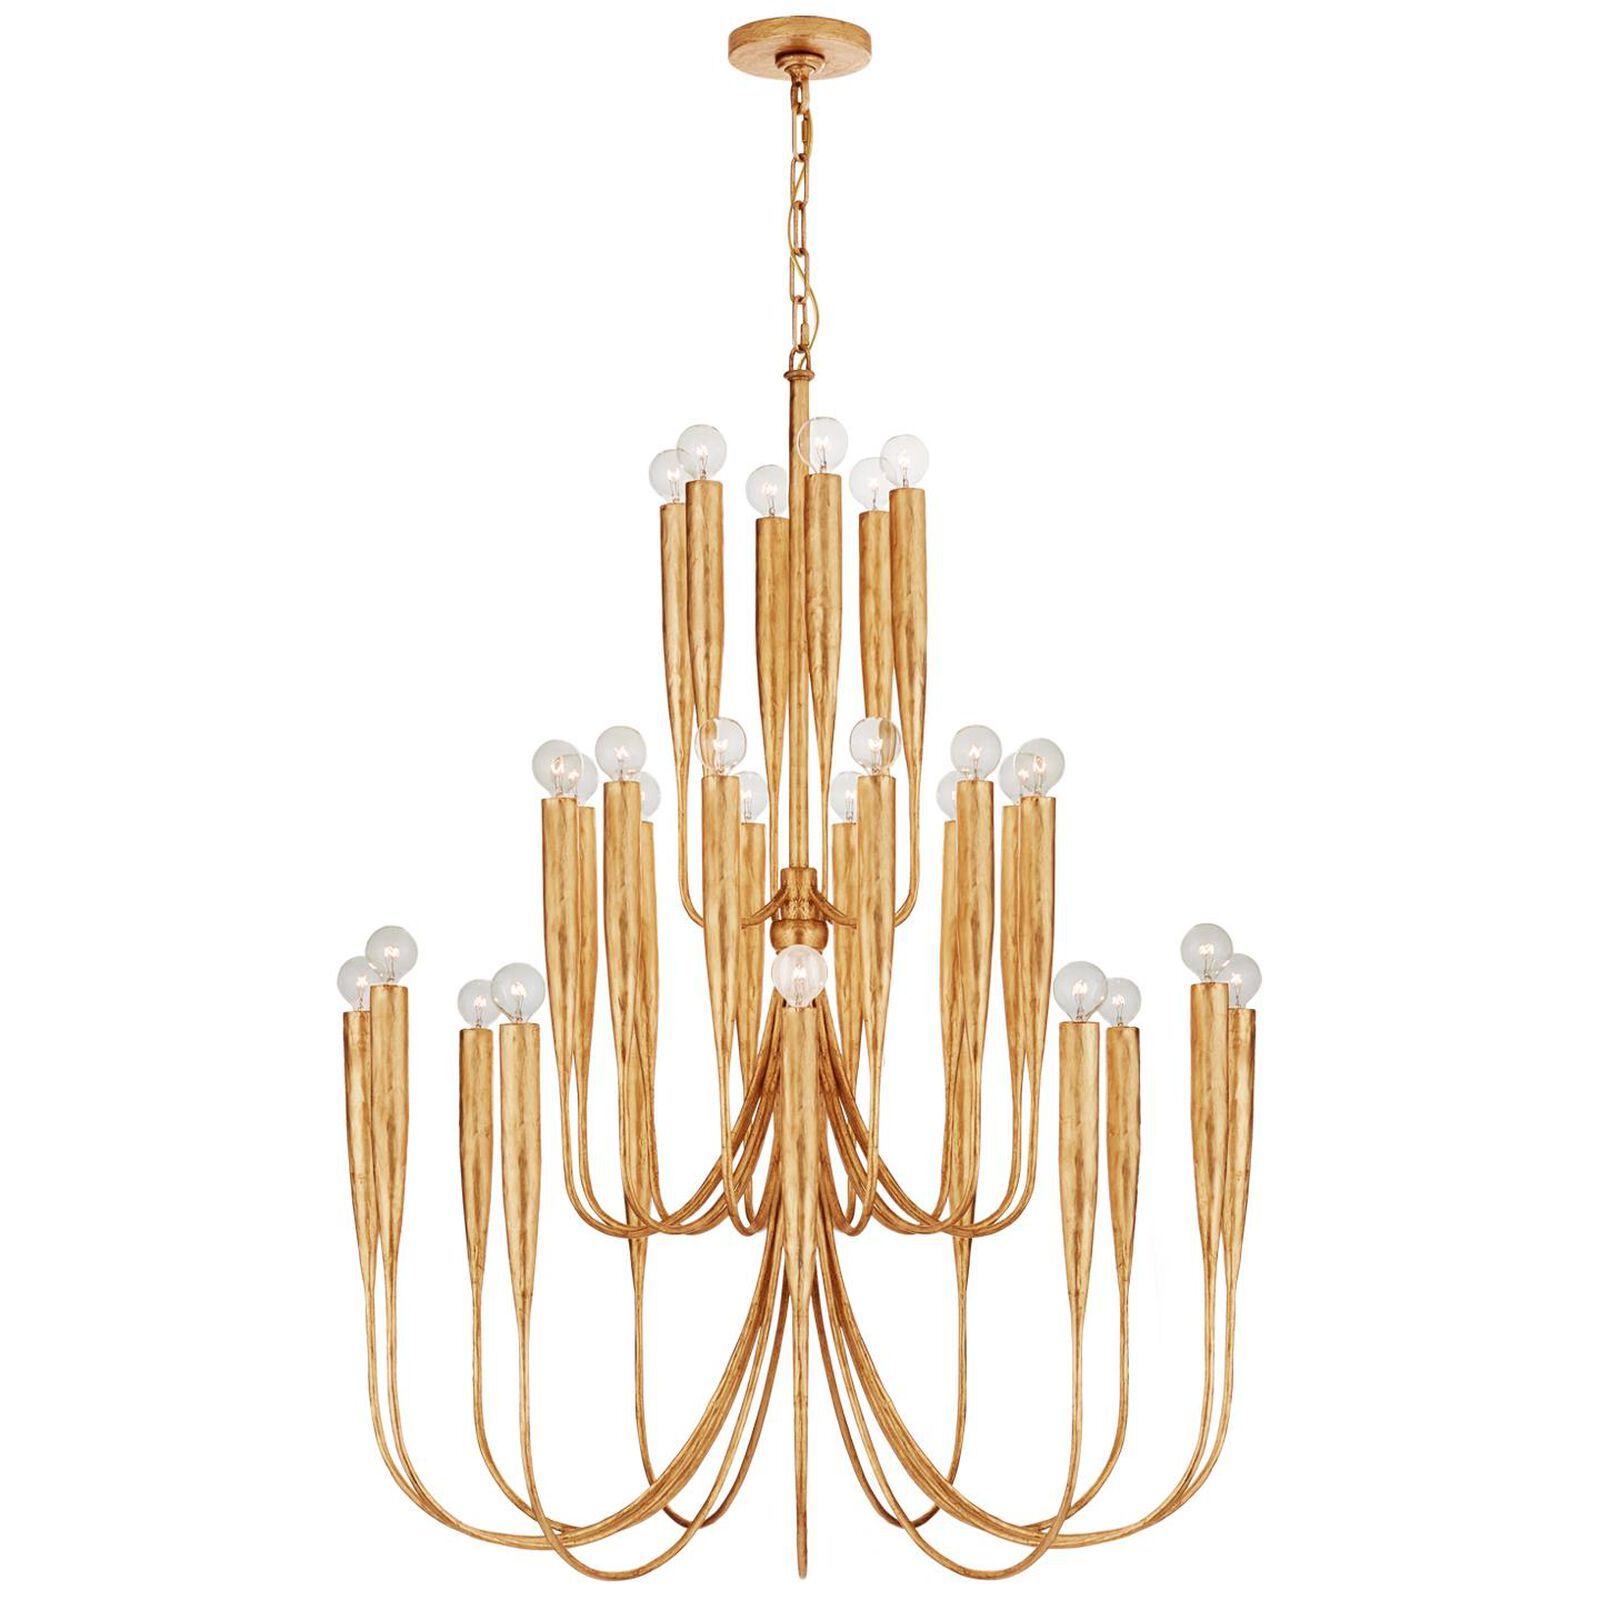 Julie Neill Acadia 33 Inch 30 Light Chandelier by Visual Comfort and Co. | Capitol Lighting 1800lighting.com